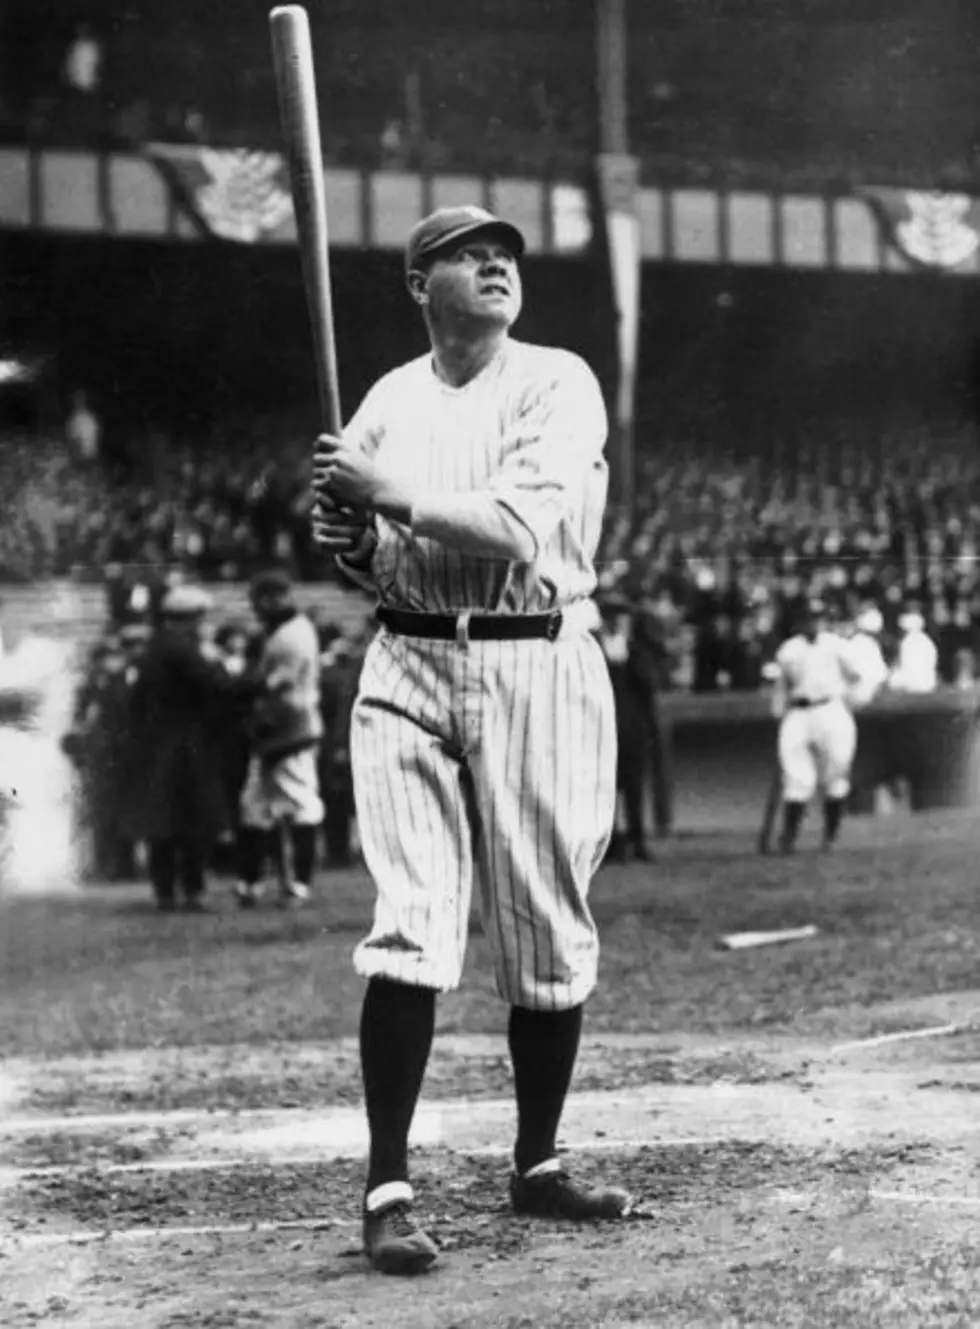 Birthdays For April 27th + Babe Ruth Day